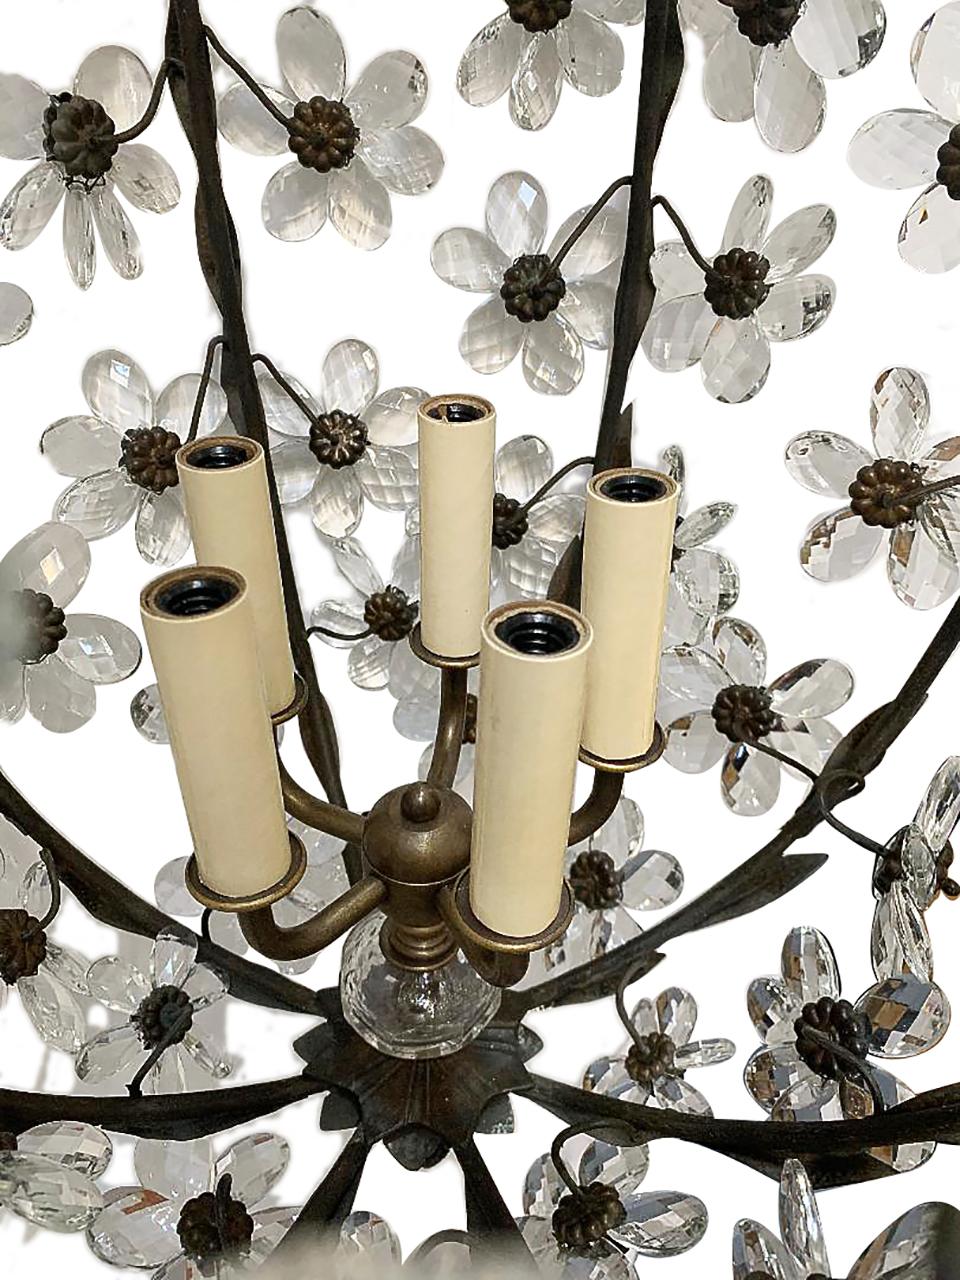 A set of three French circa 1930s patinated bronze and crystal flowers chandeliers with a 5-light interior cluster. Sold individually.

Measurements:
Minimum drop 31